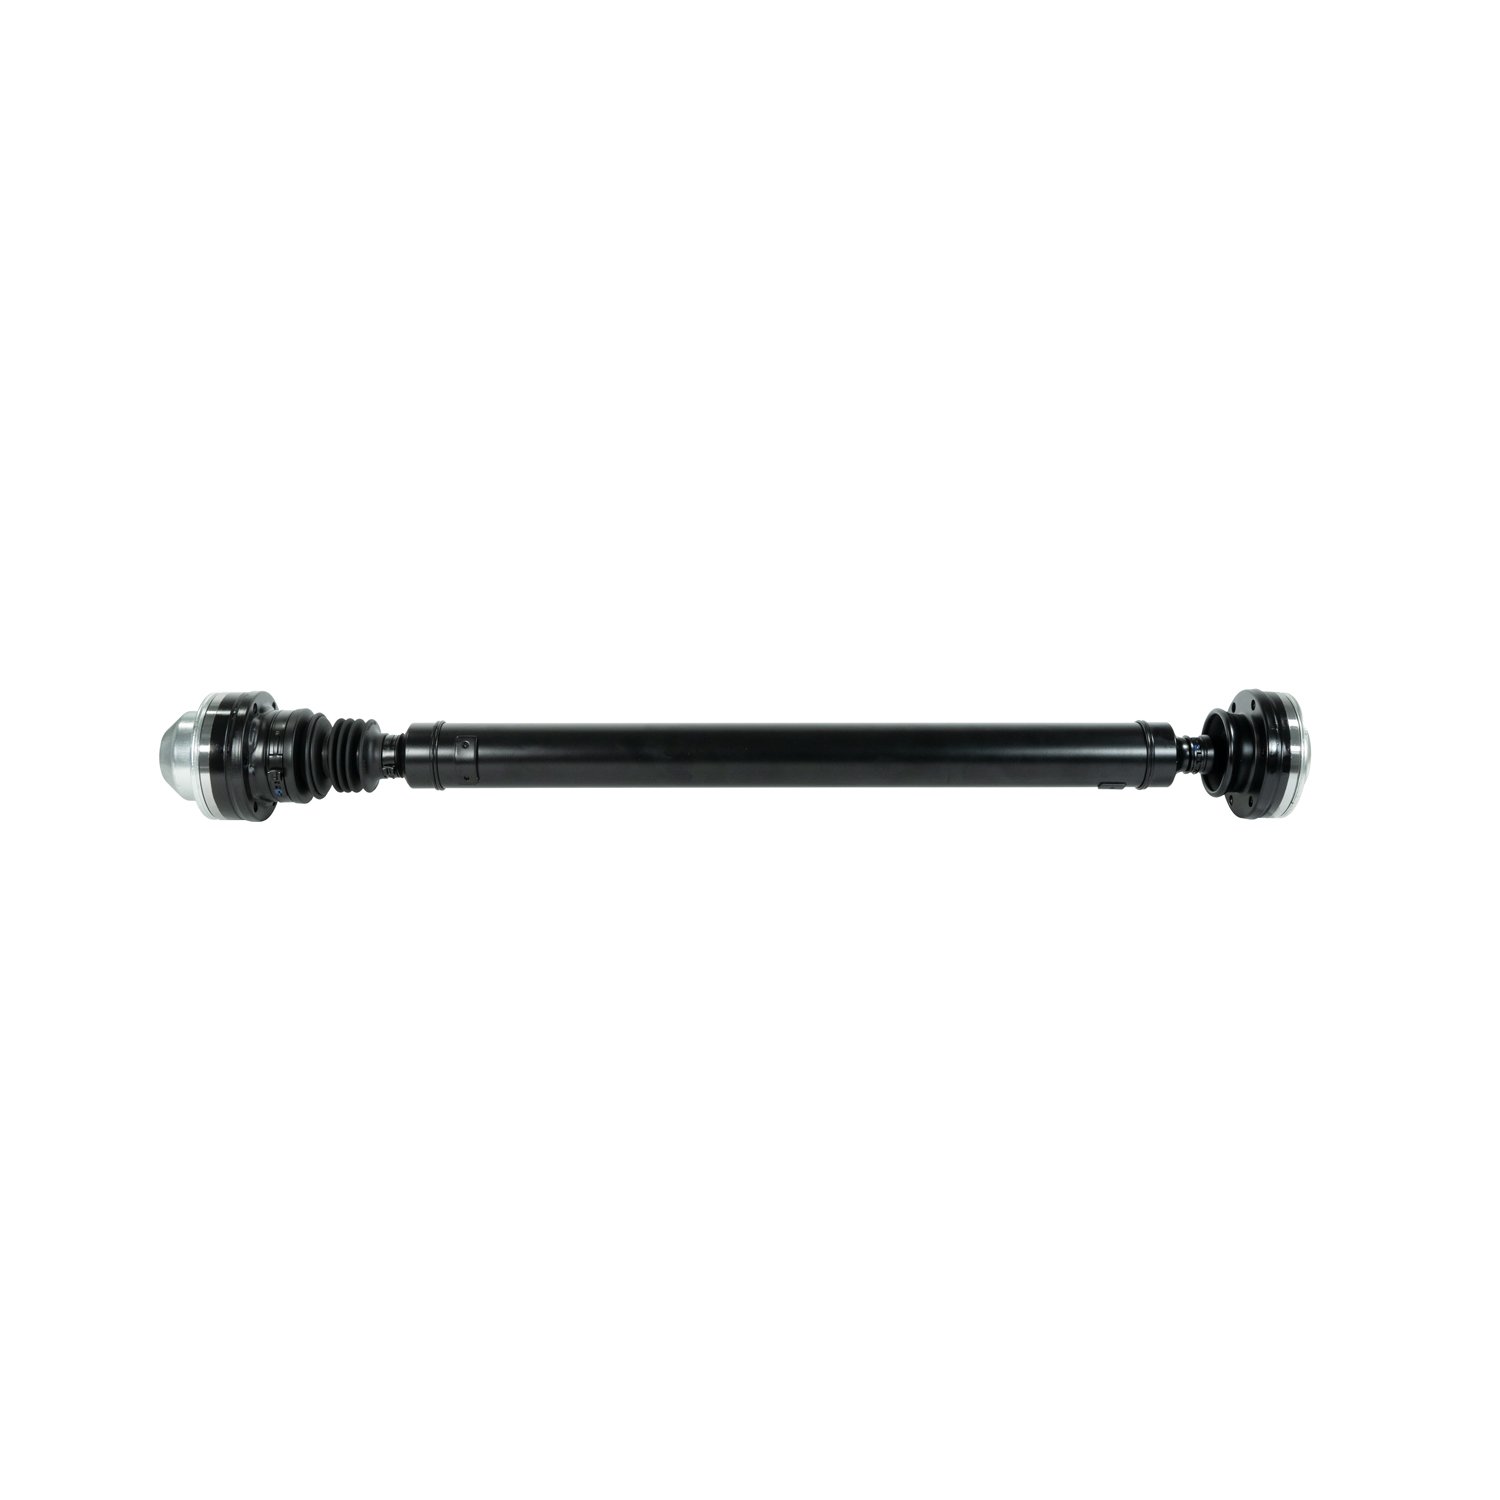 USA Standard ZDS9313 Front Driveshaft, For Grand Cherokee, 21-1/2 in. Weld-To-Weld